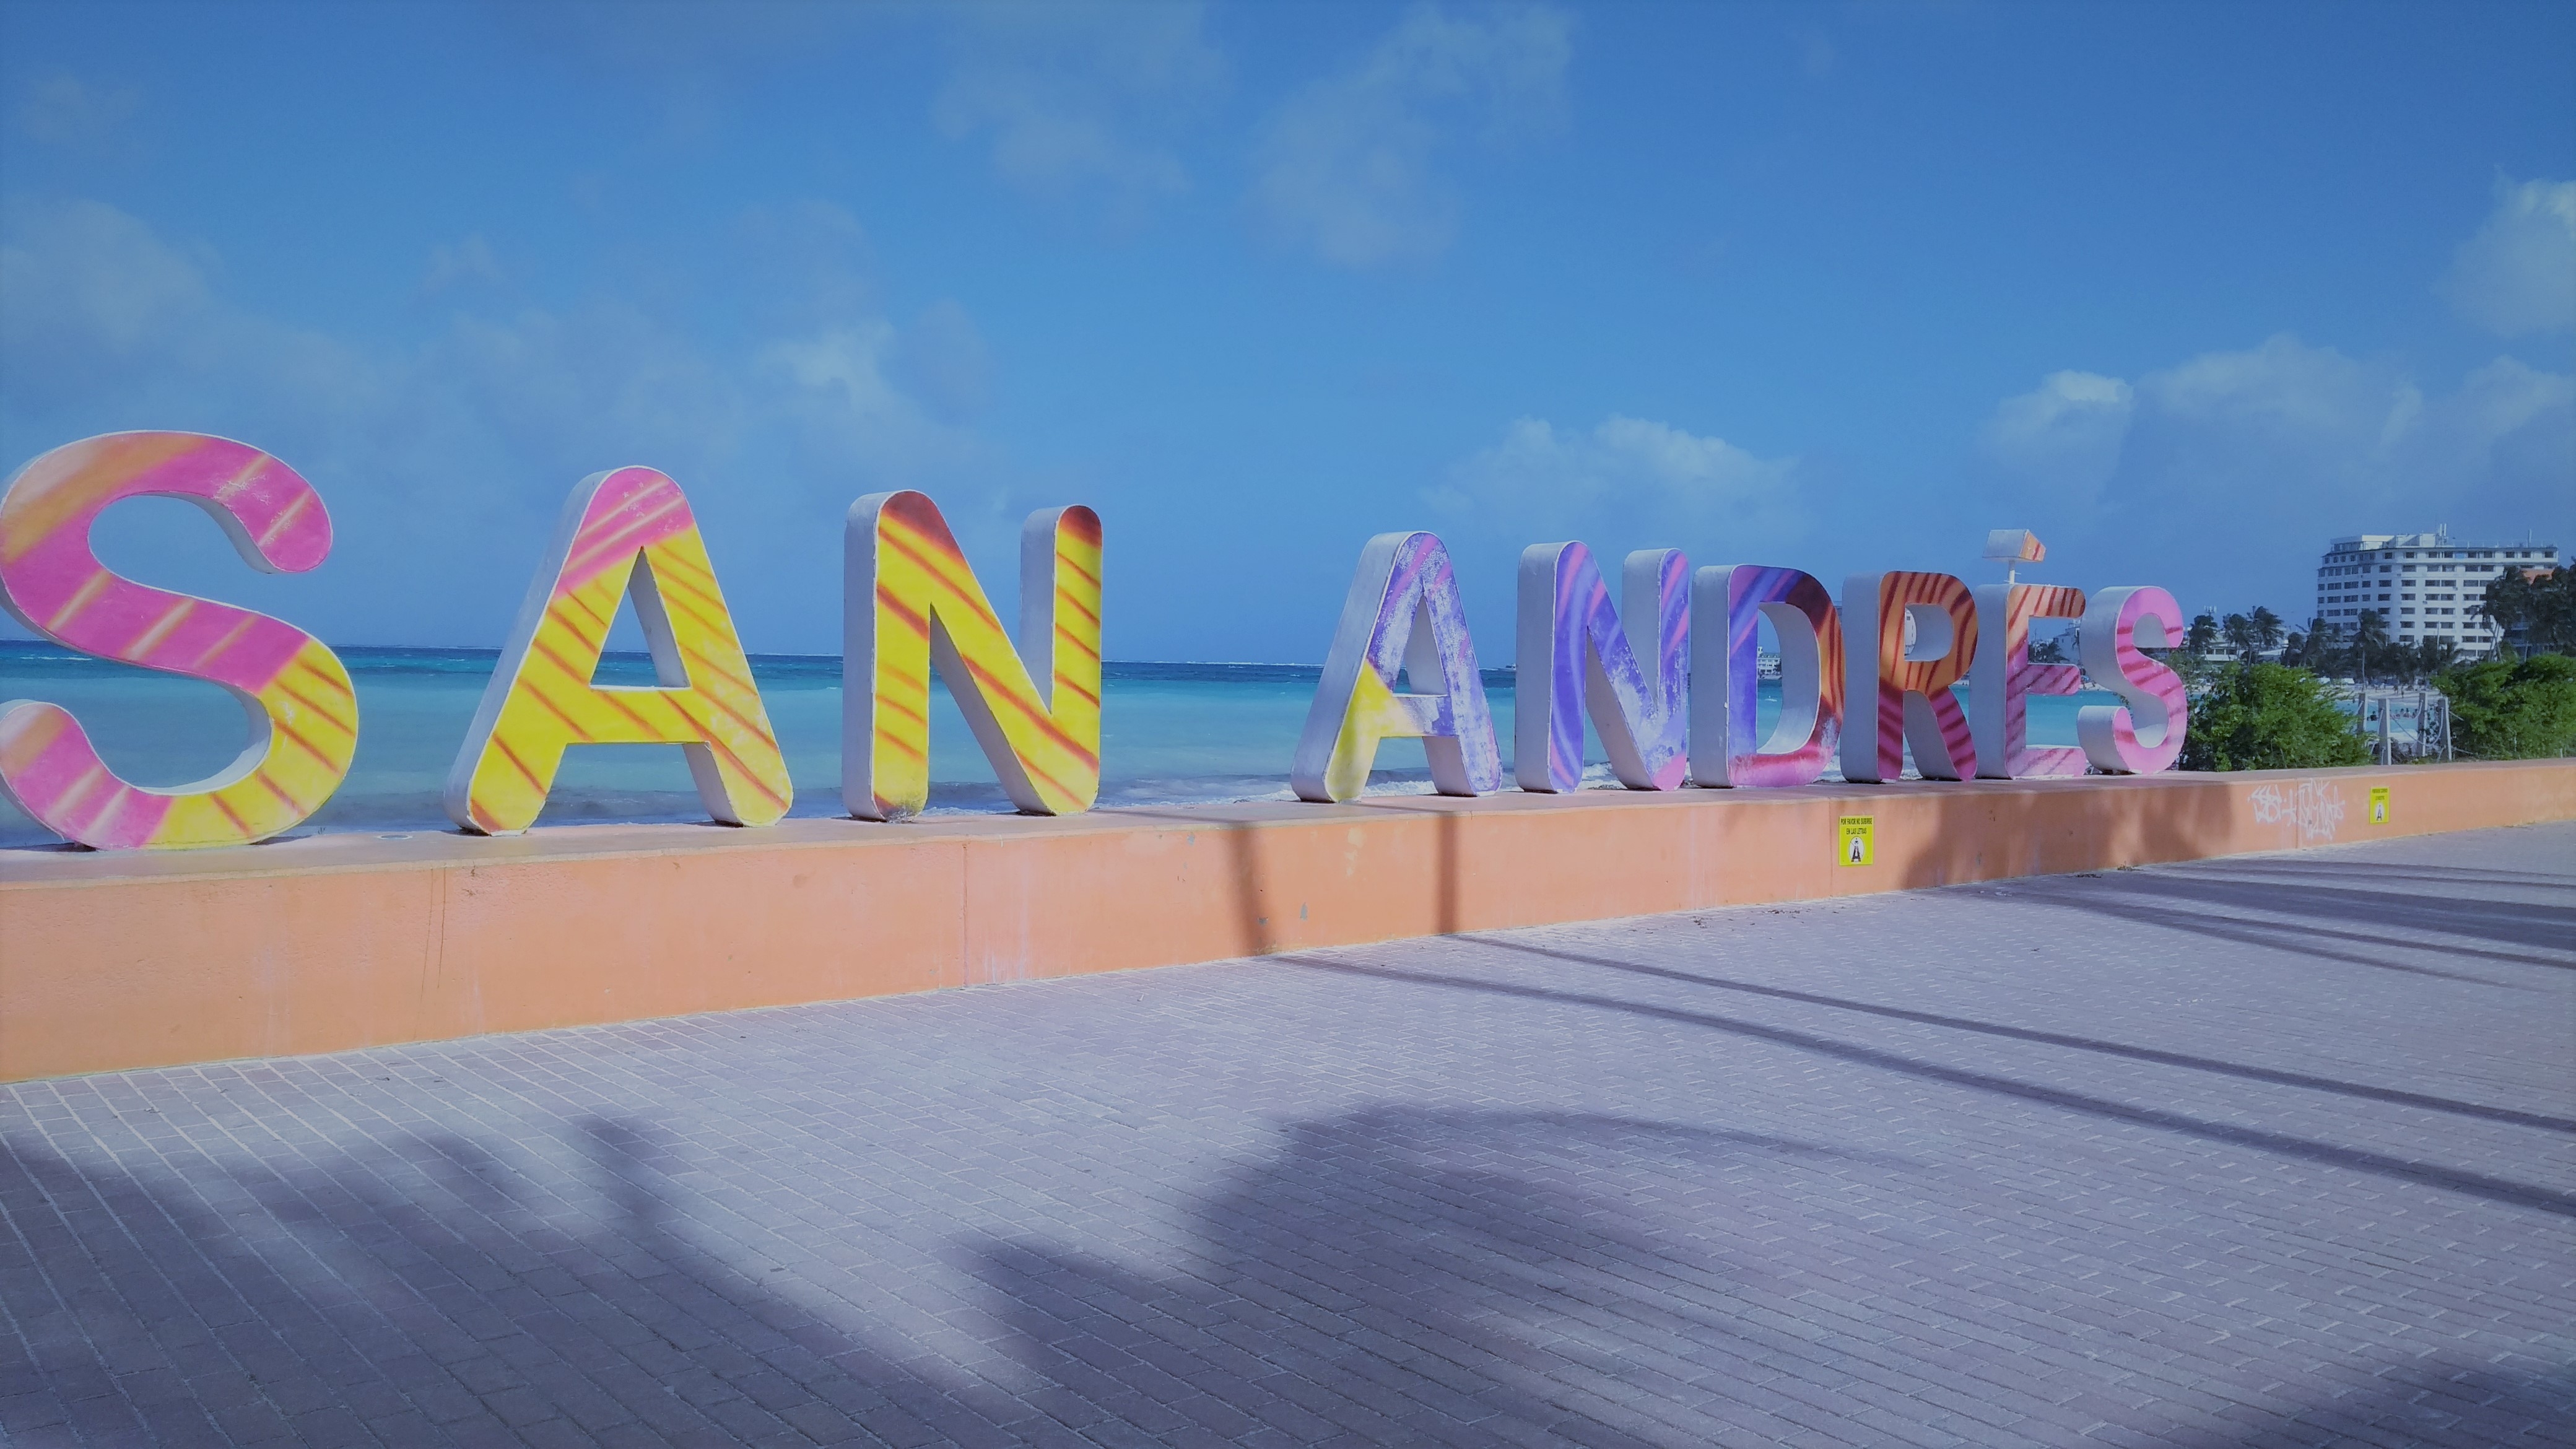 San Andres Colombia